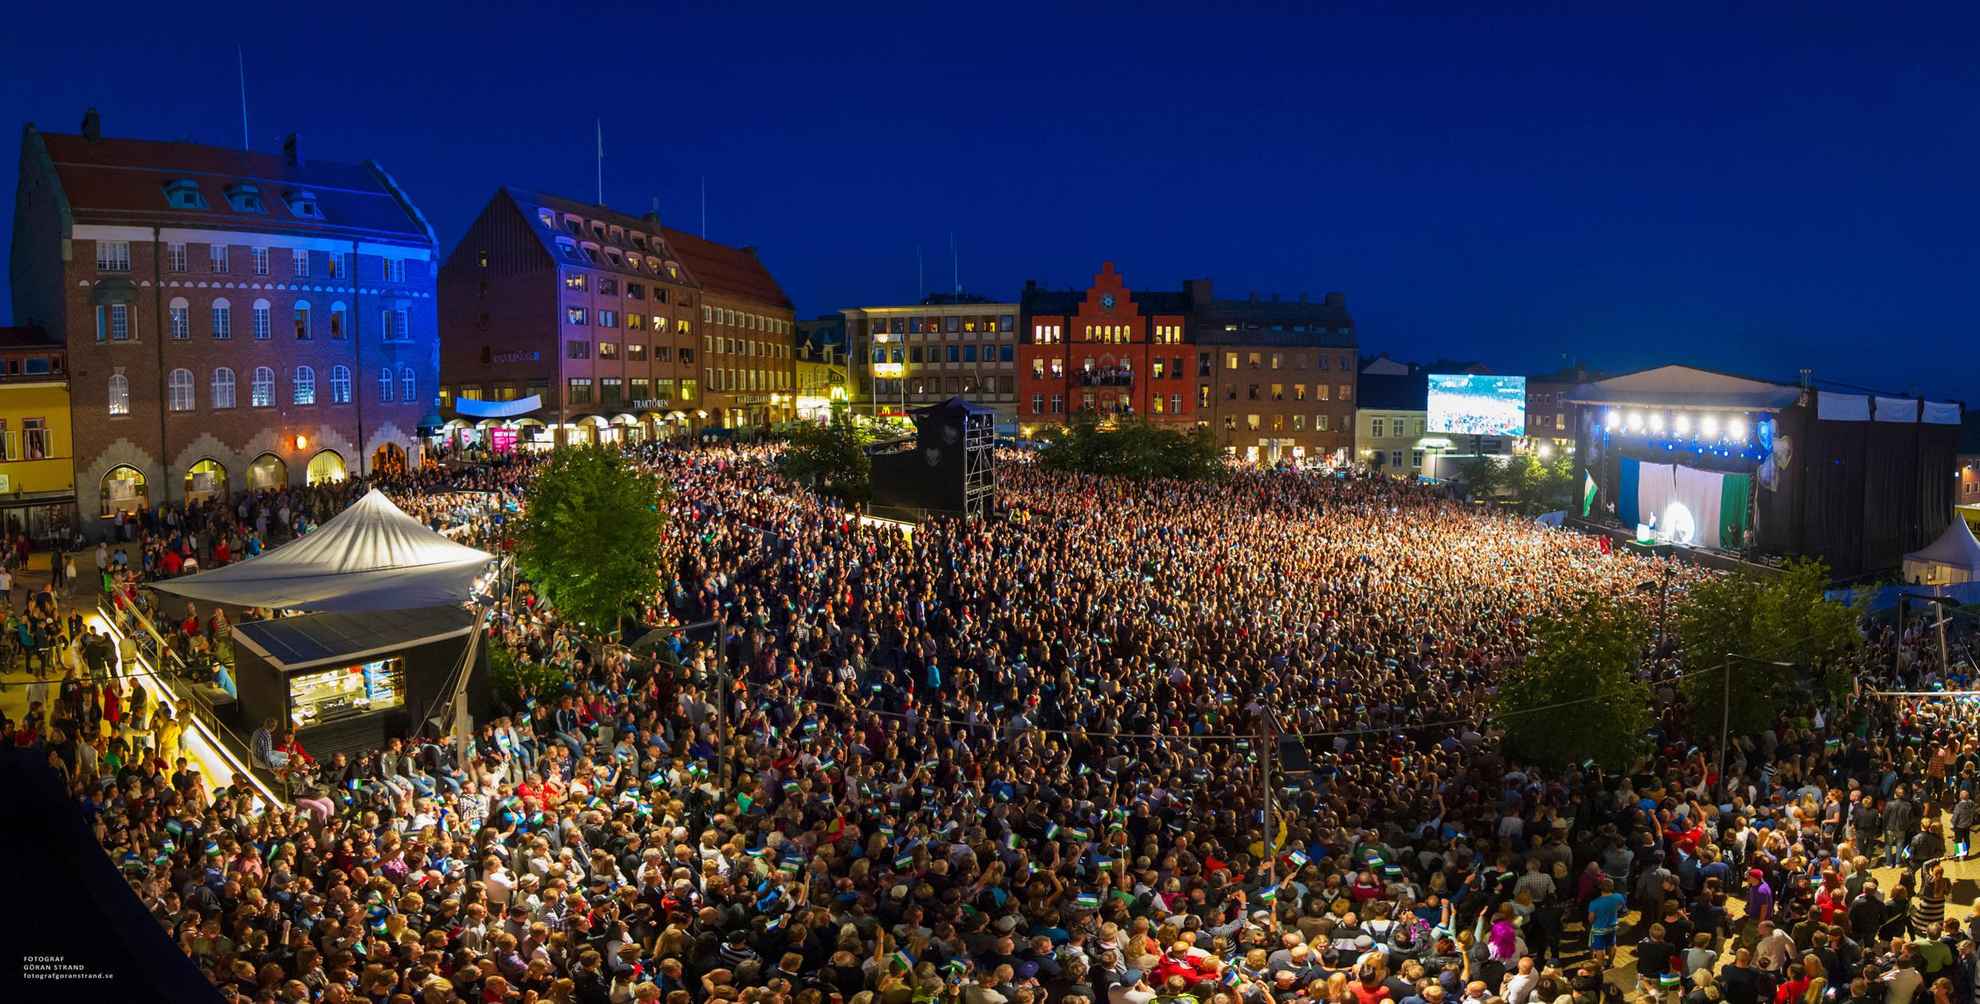 A large crowd at a music festival on a square in Östersund.